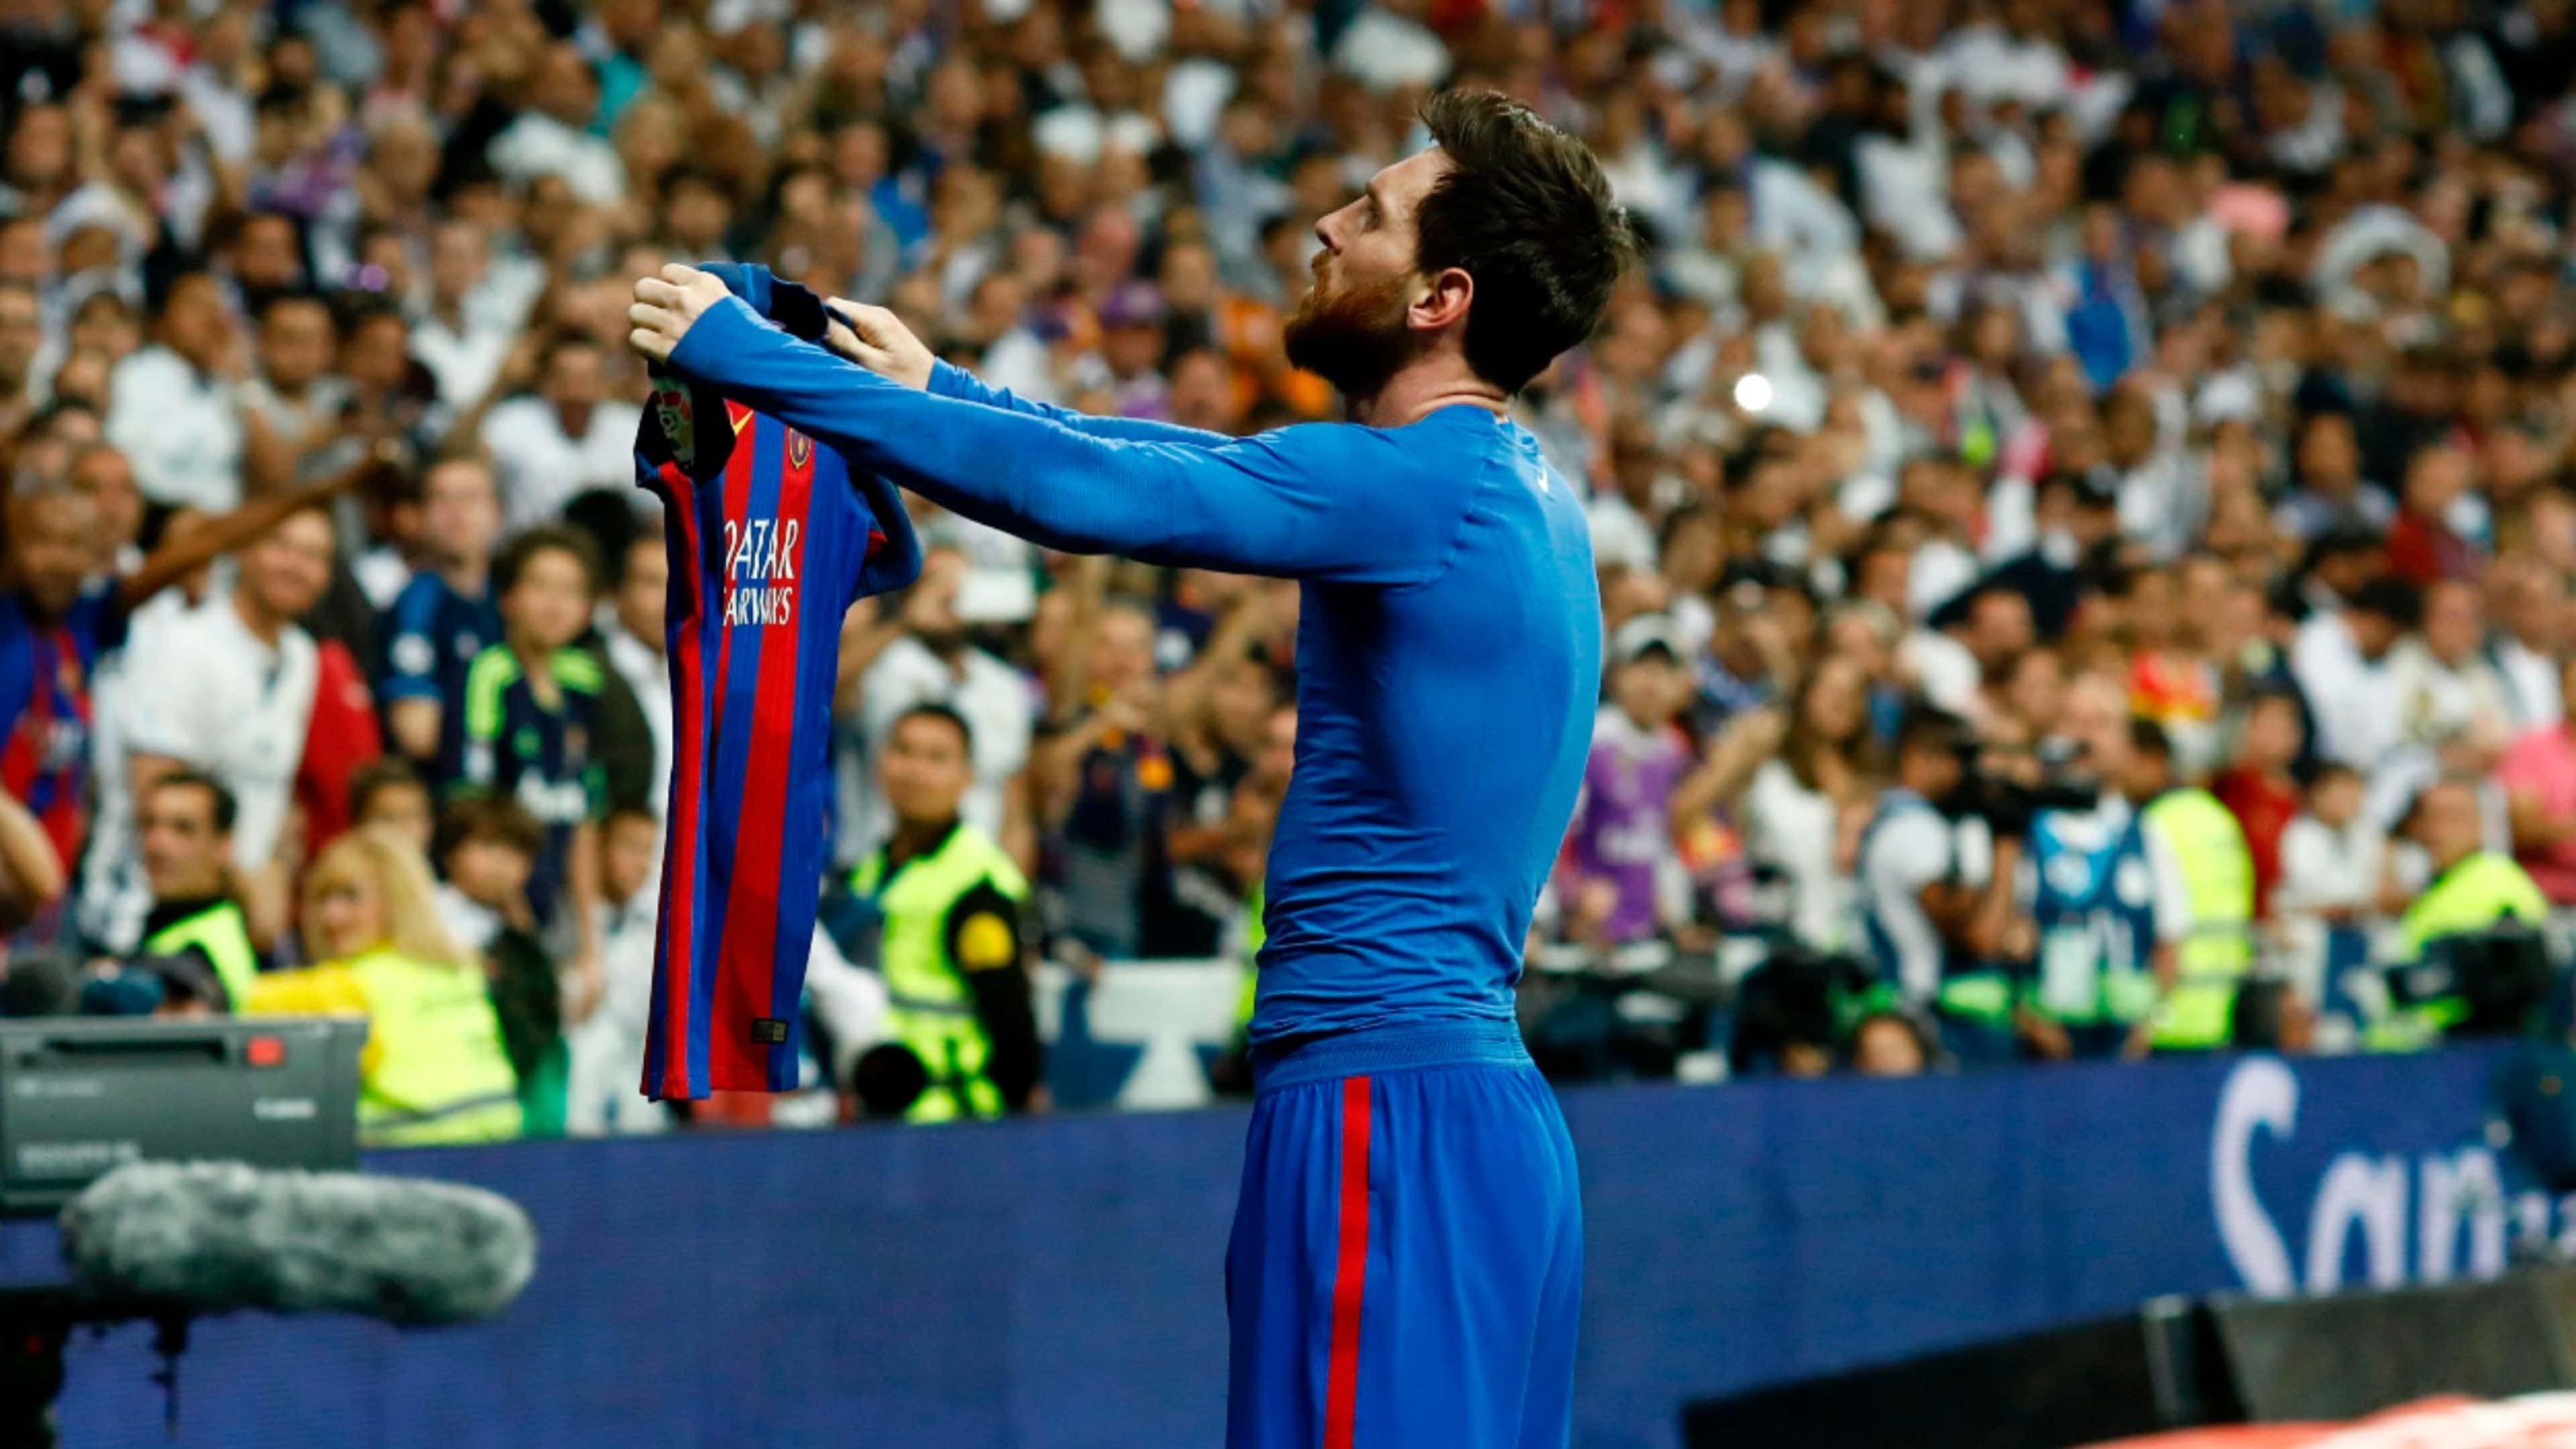 There's only one GOAT': fan edits iconic Messi-Ronaldo picture